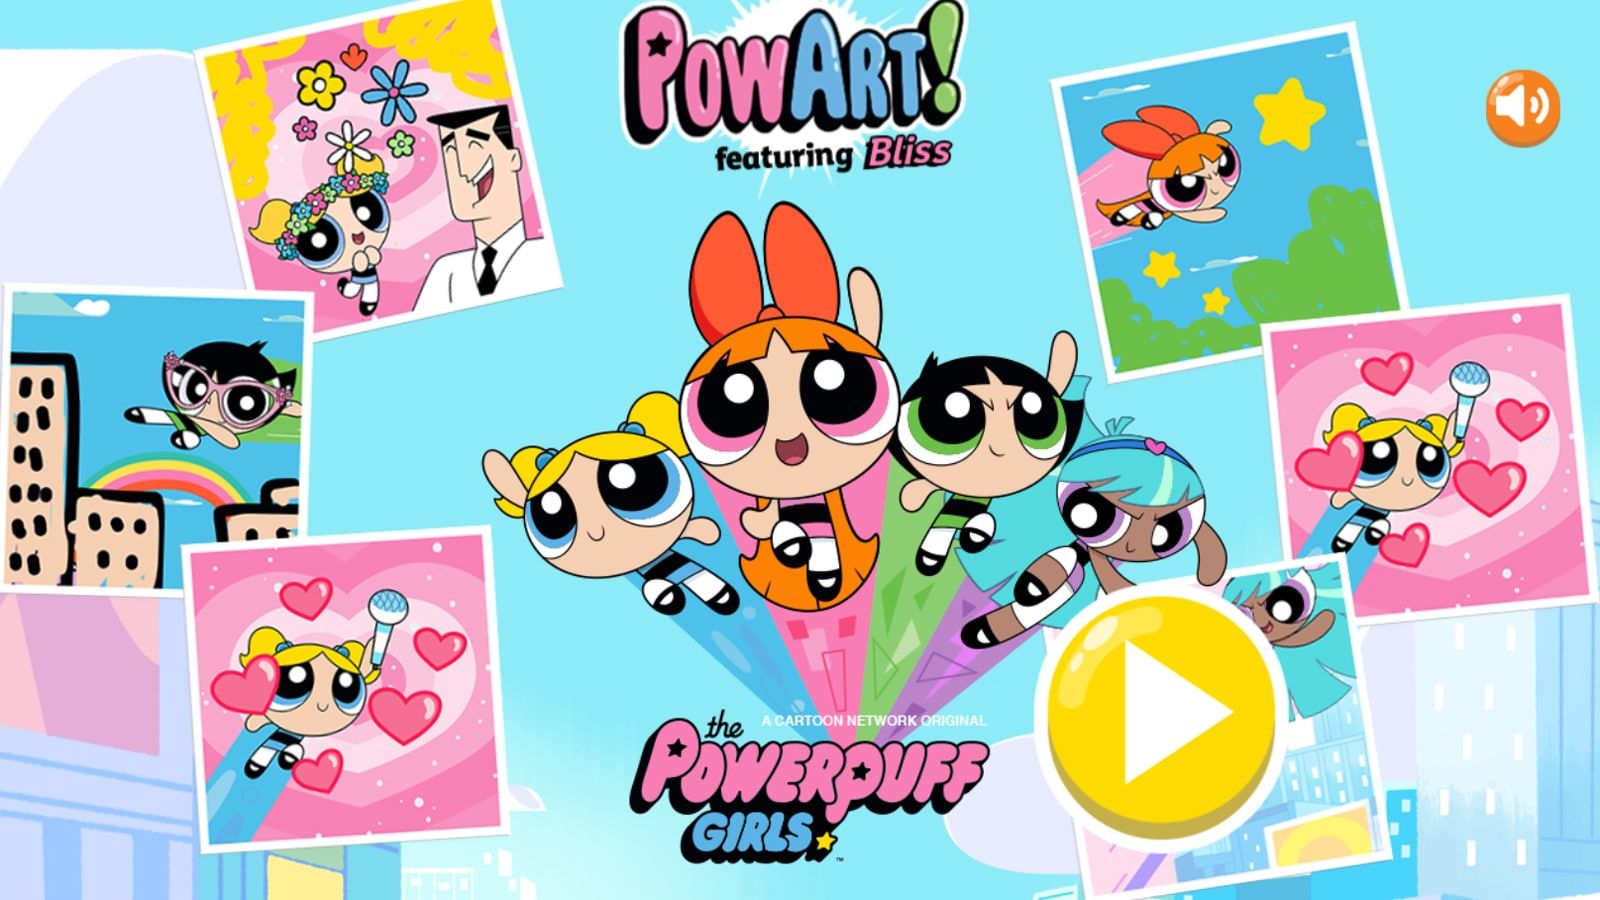 The Powerpuff Girls. Games, Videos and Downloads